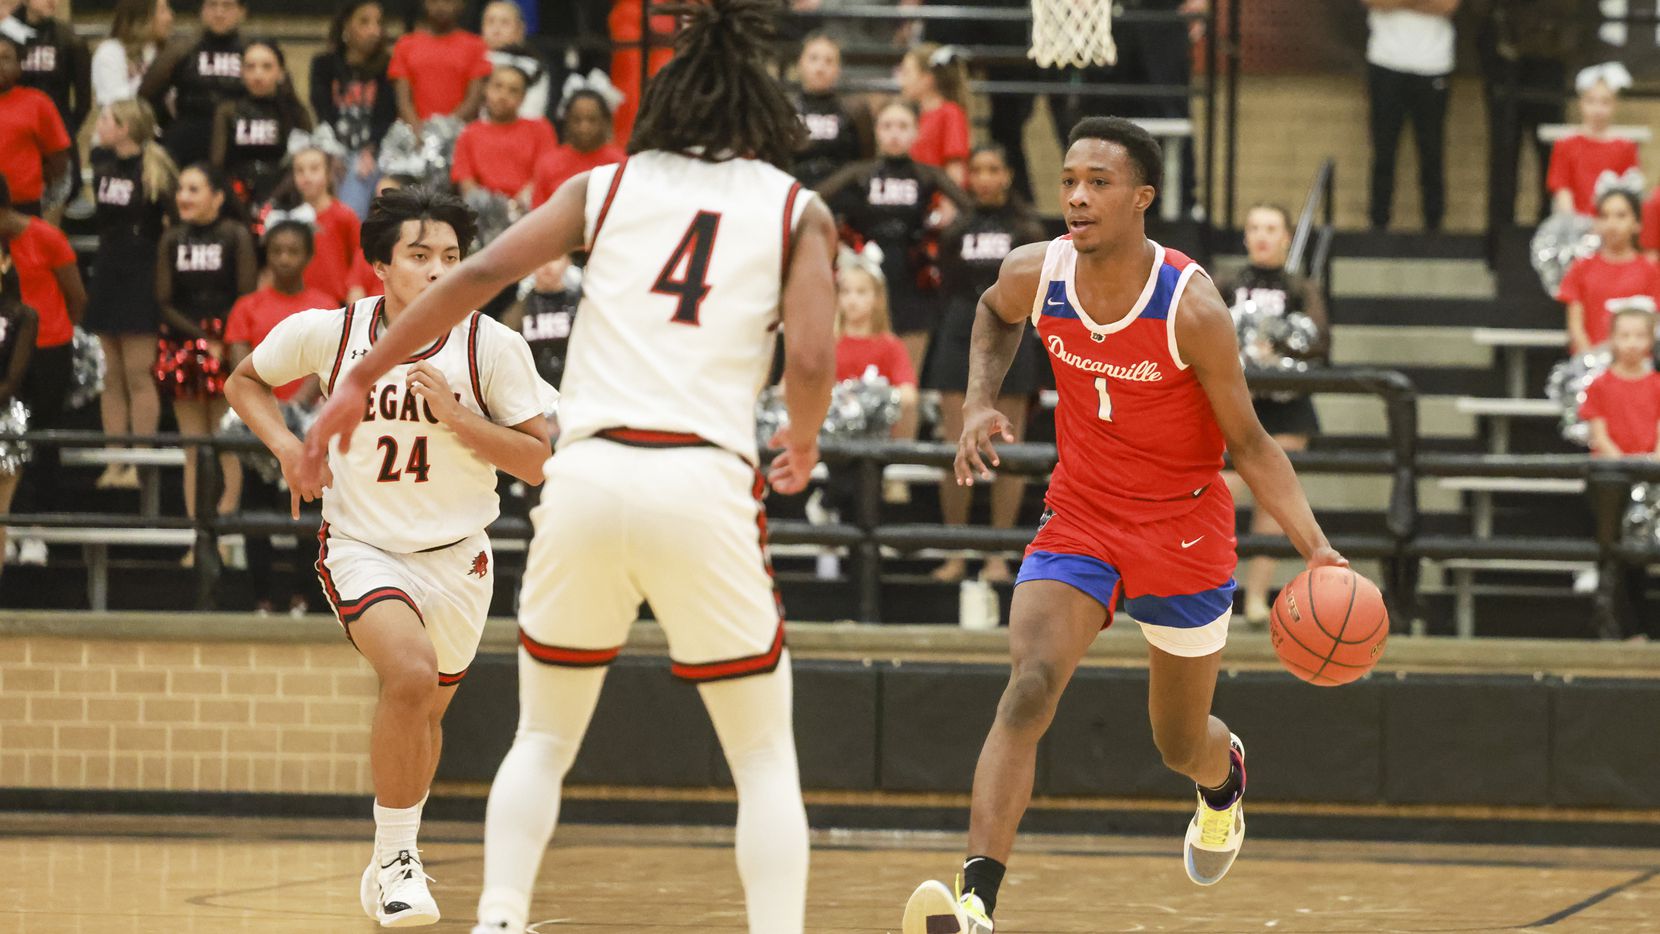 Boys basketball player of the week (1/29): Duncanville’s Ron Holland